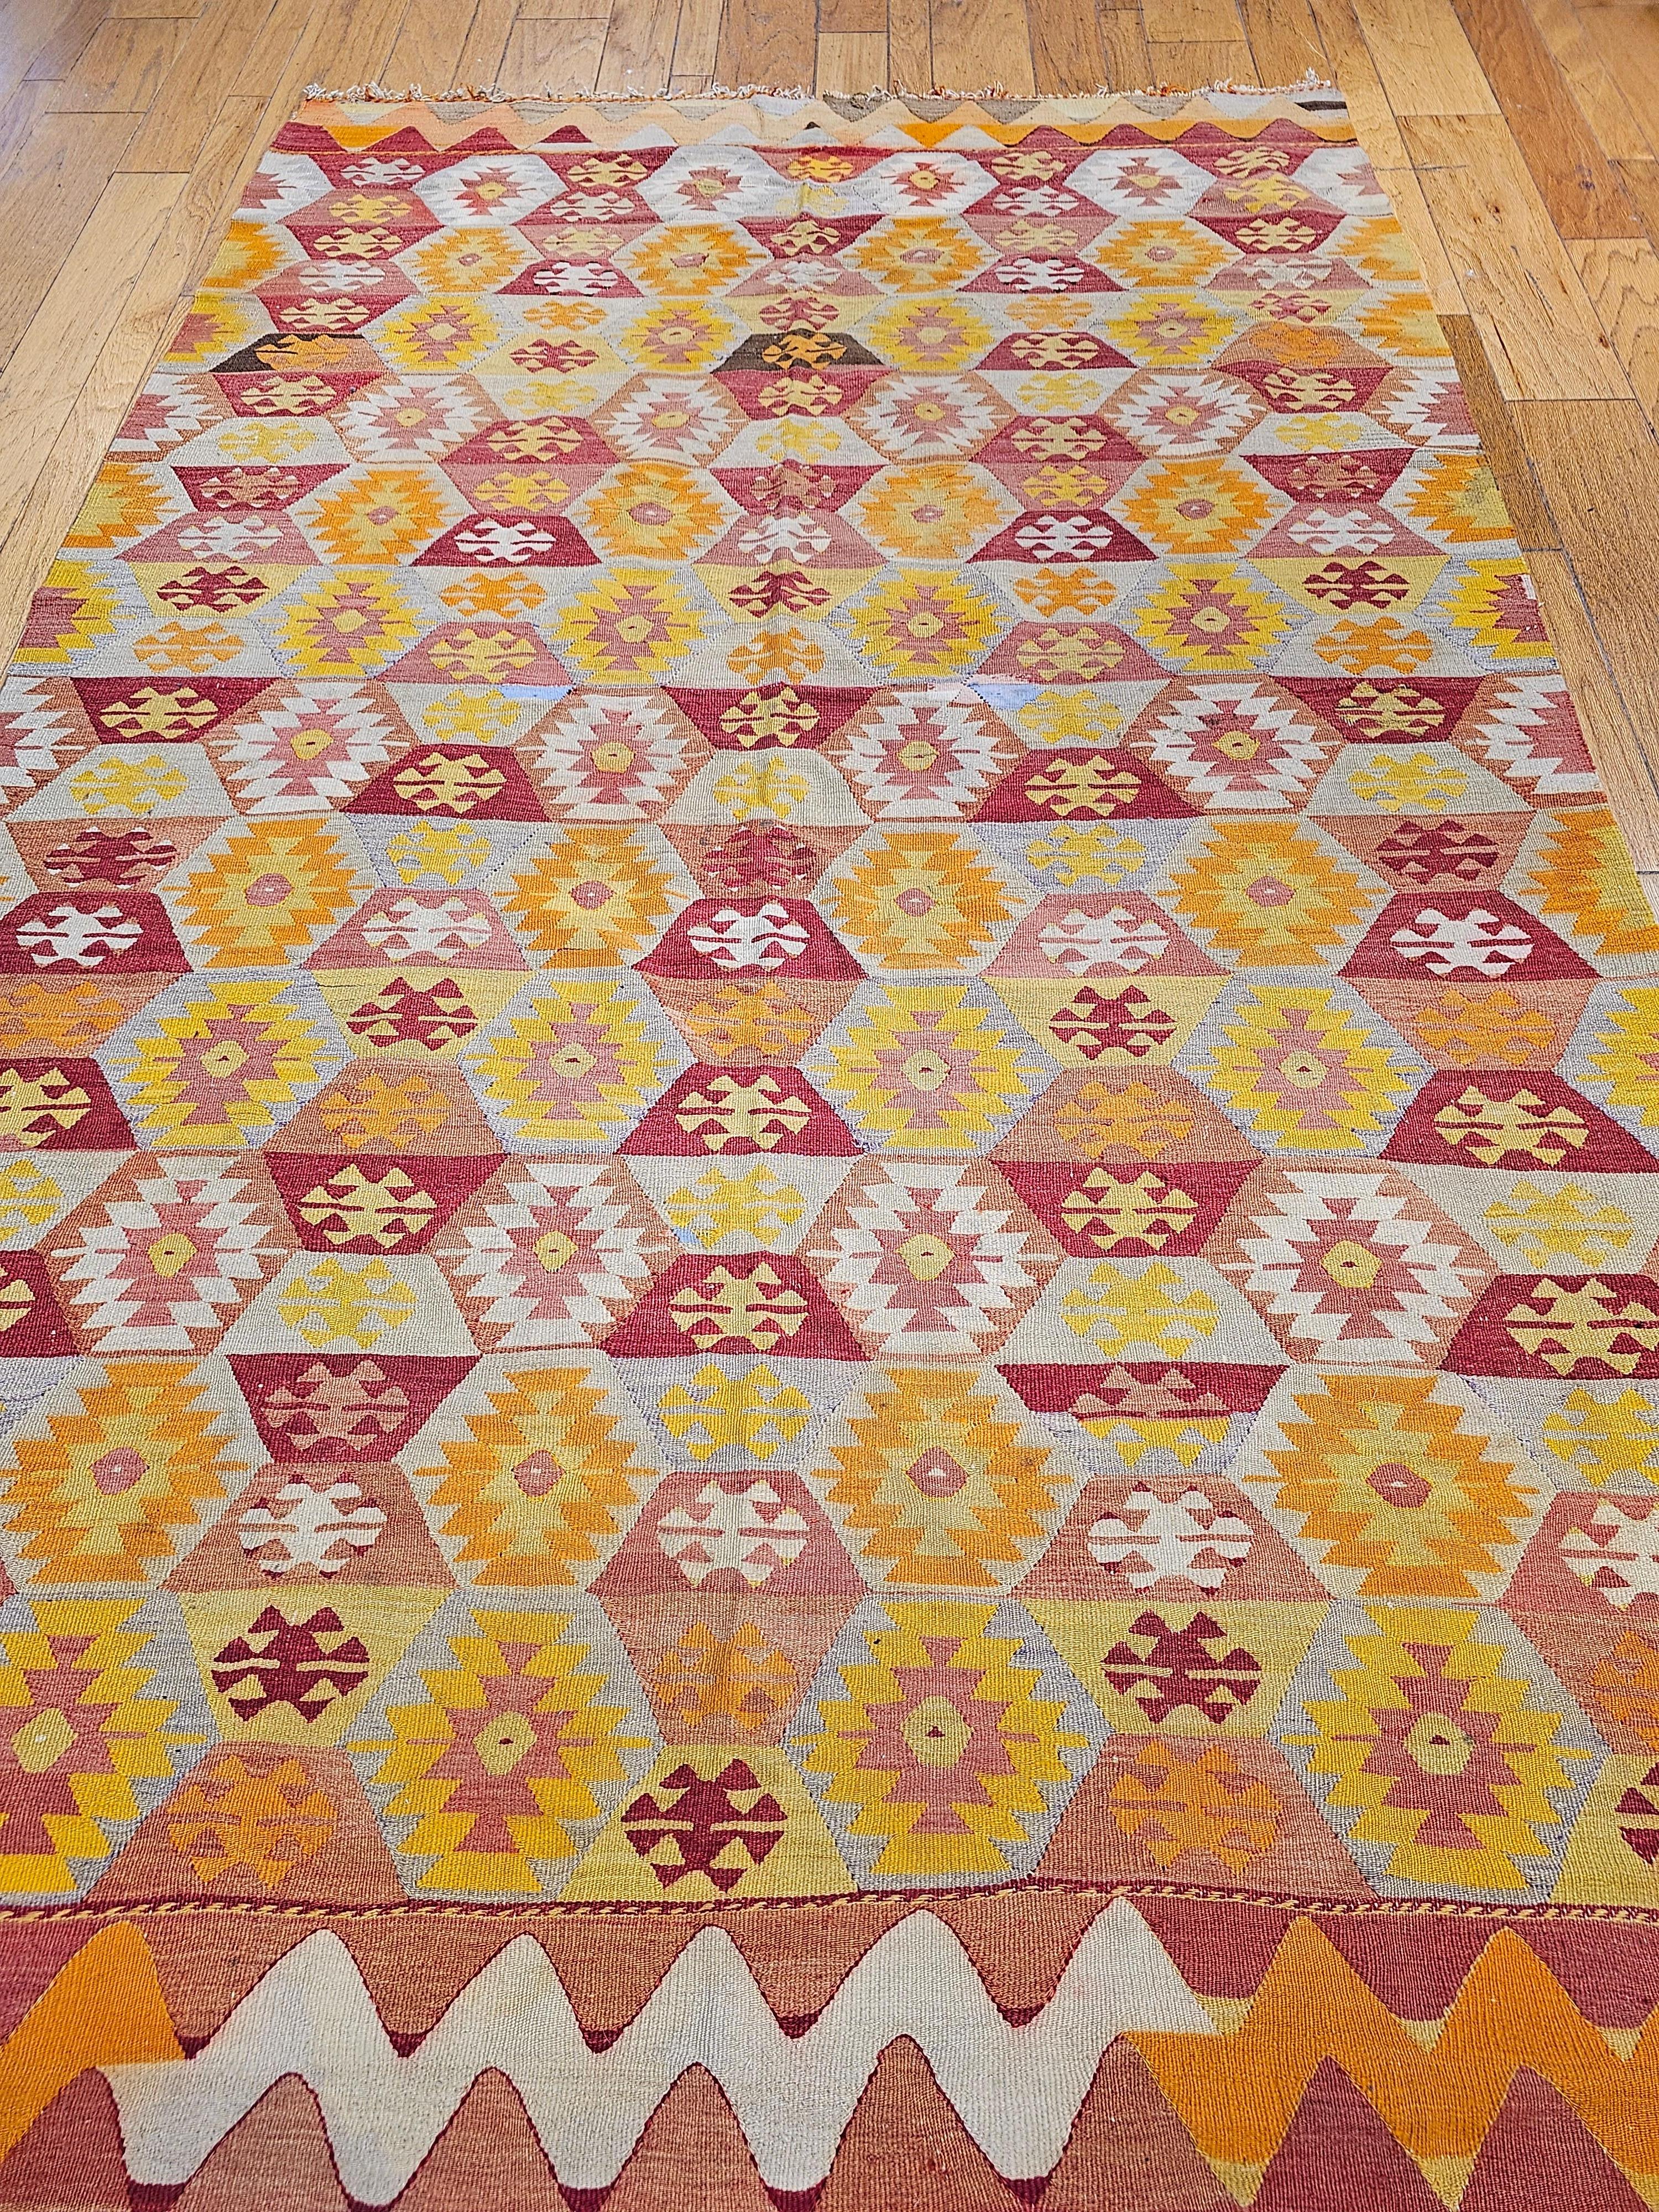 Vintage room-size Turkish kilim from the 2nd quarter of the 1900s in an all over geometric pattern in autumn colors of red, orange, yellow, ivory and gray.  The color scheme in this kilim are warm Southwestern colors and the beautiful colors of the